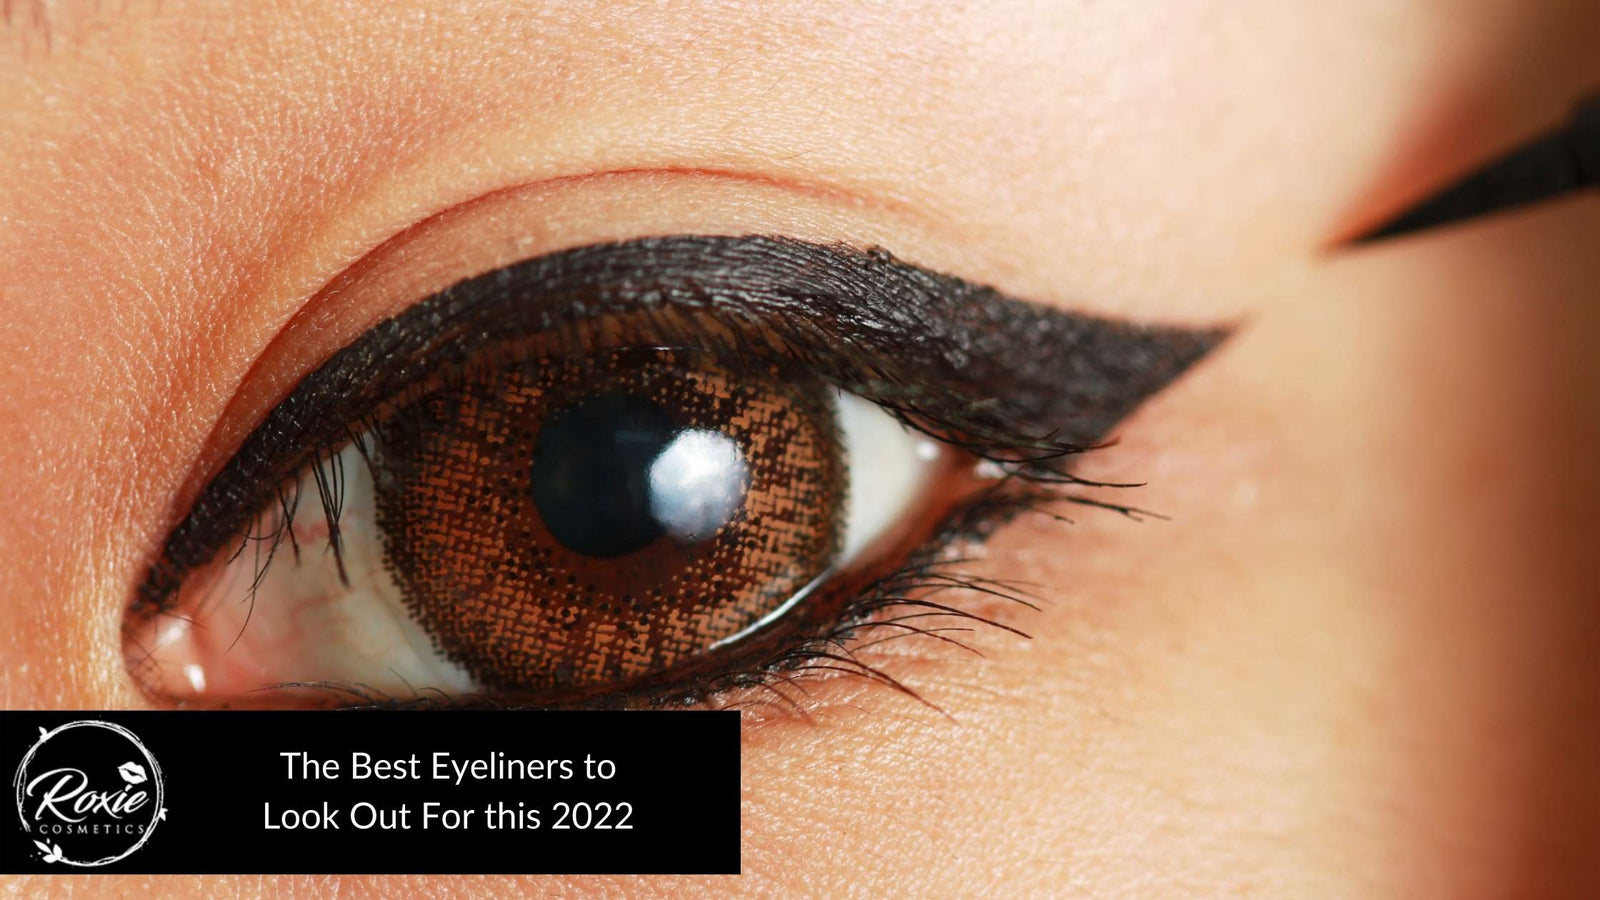 10 Cosmetics For this Look Best 2022 Out to Roxie Eyeliners –